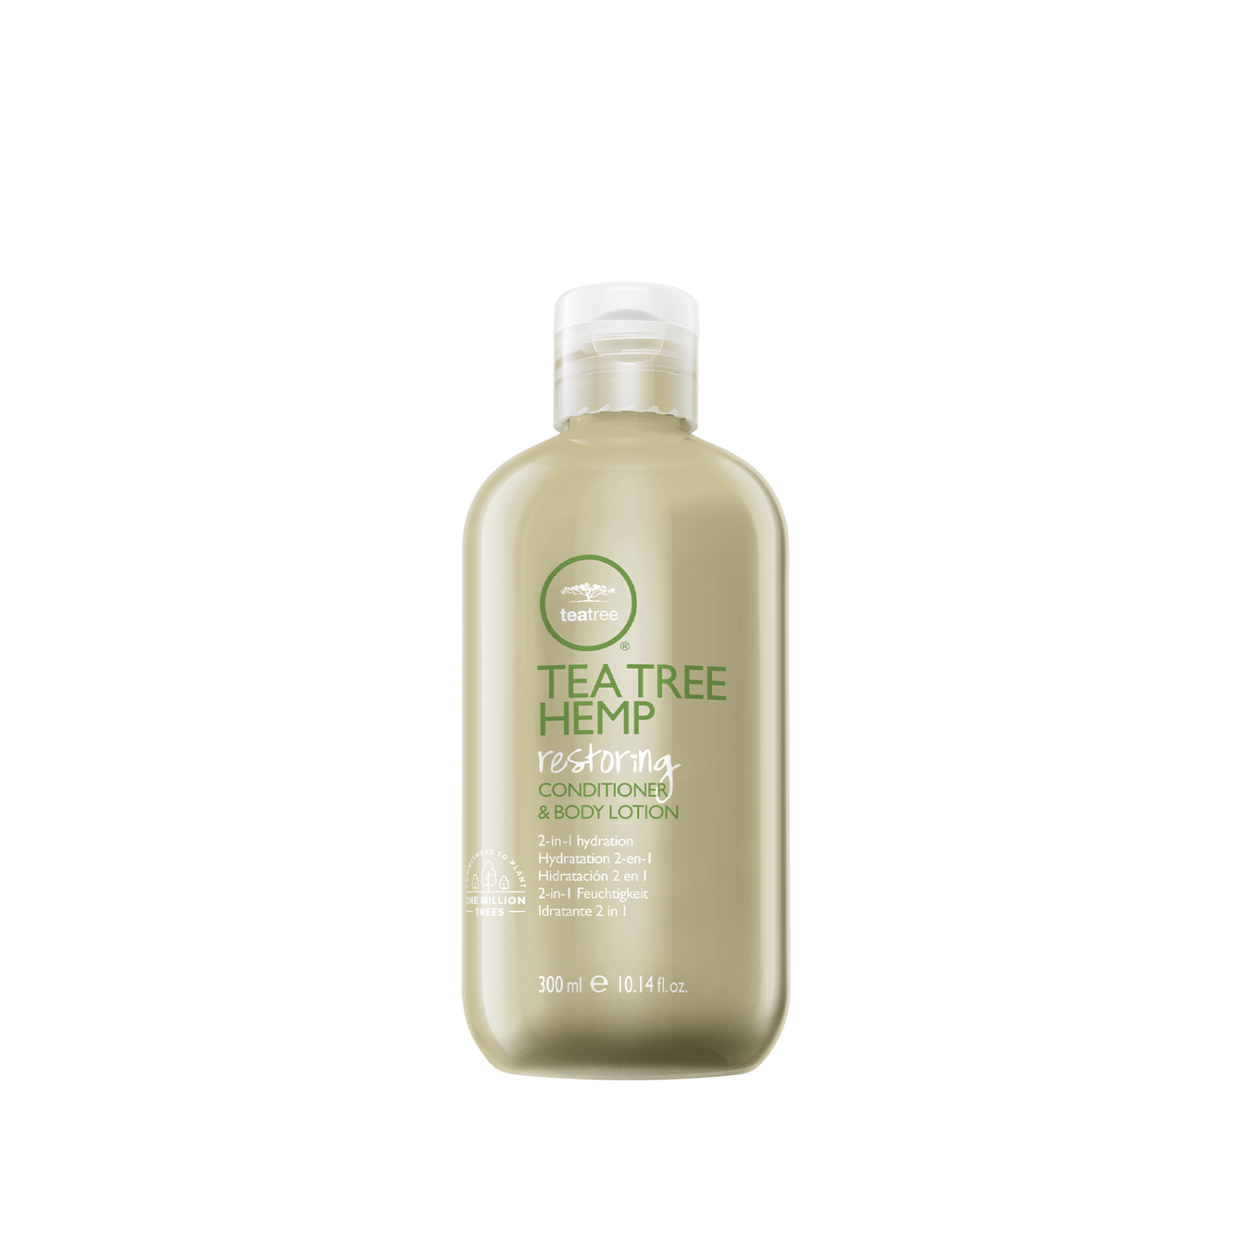 Tea Tree Hemp Restoring Conditioner & Body Lotion - 300ML - by Paul Mitchell |ProCare Outlet|